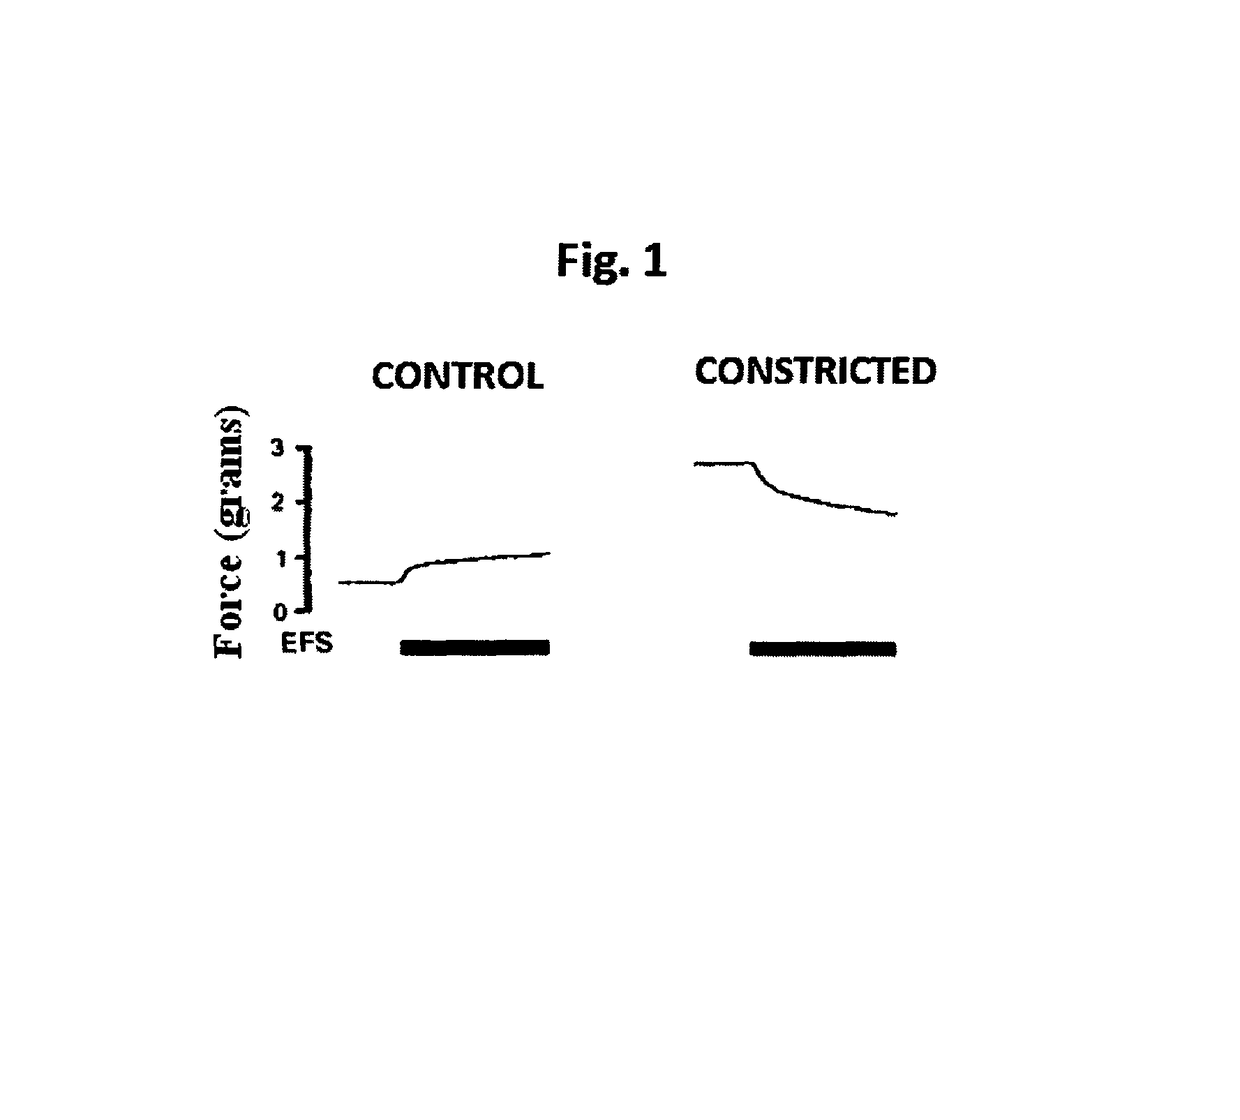 Use of magnetic stimulation to modulate muscle contraction